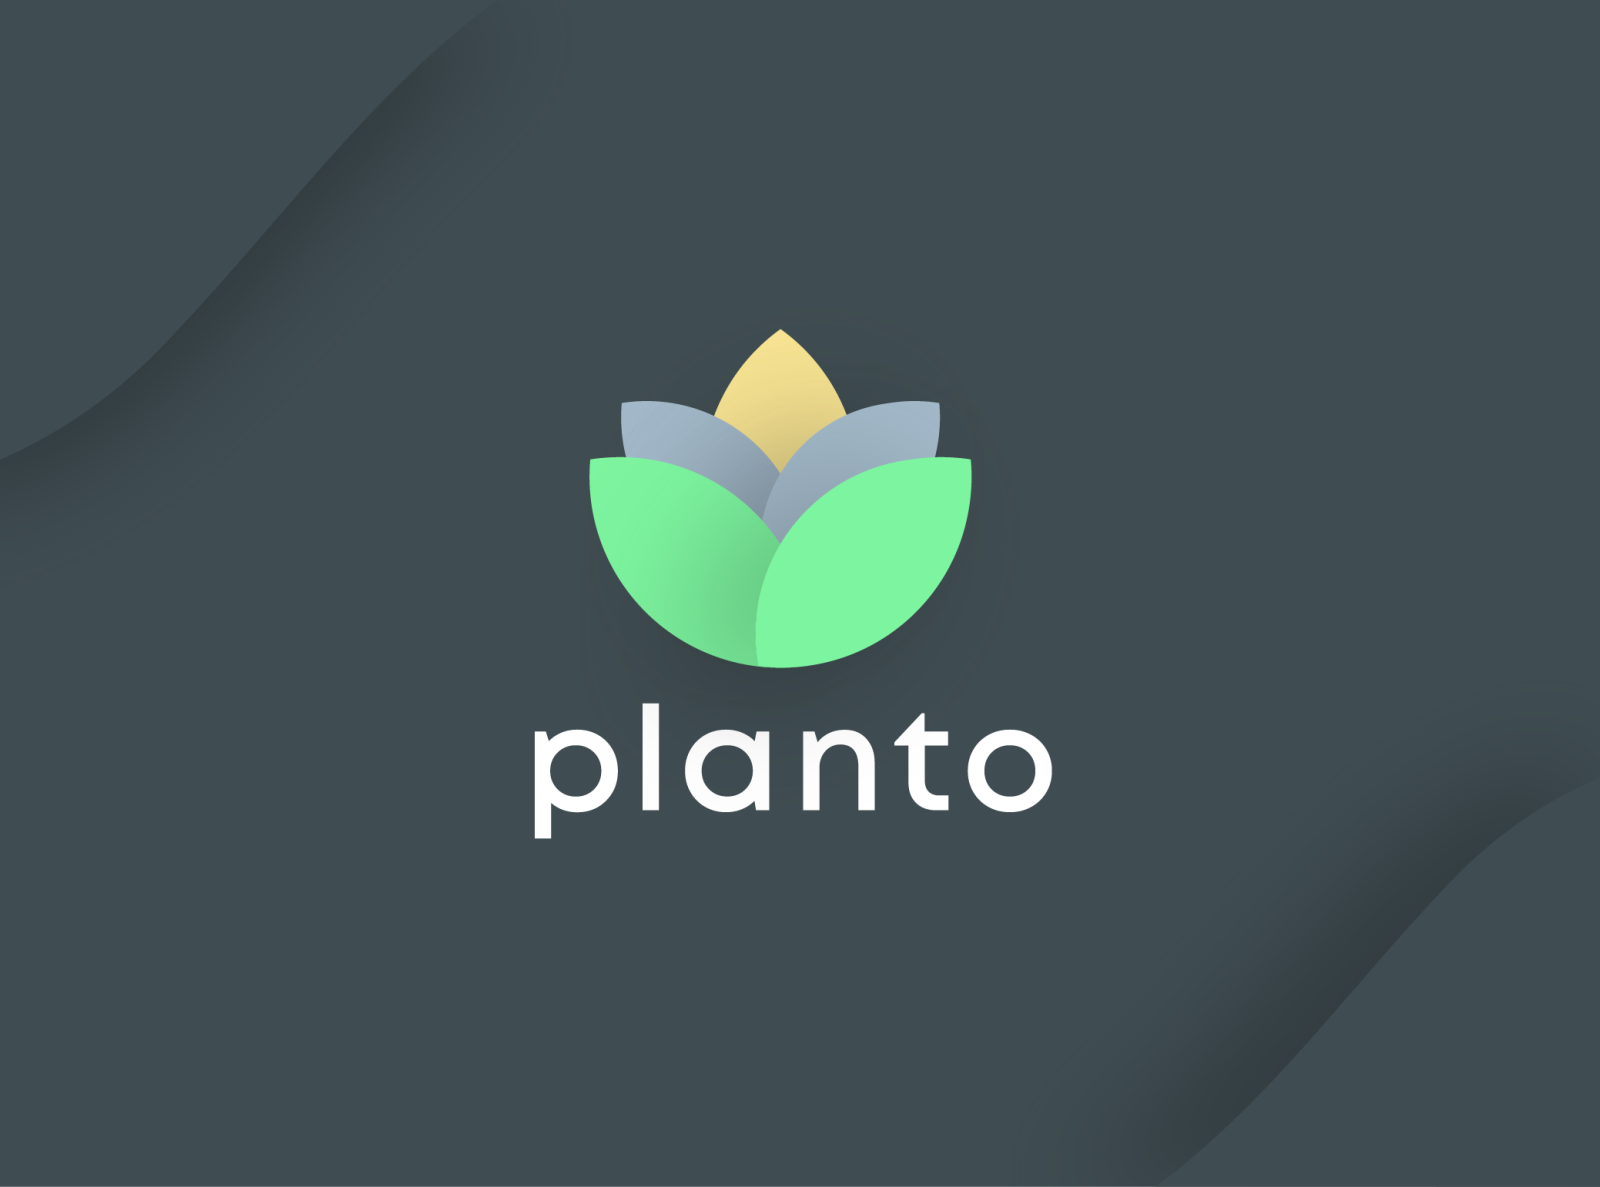 Planto Logo Design by Taiful Haque Anan on Dribbble